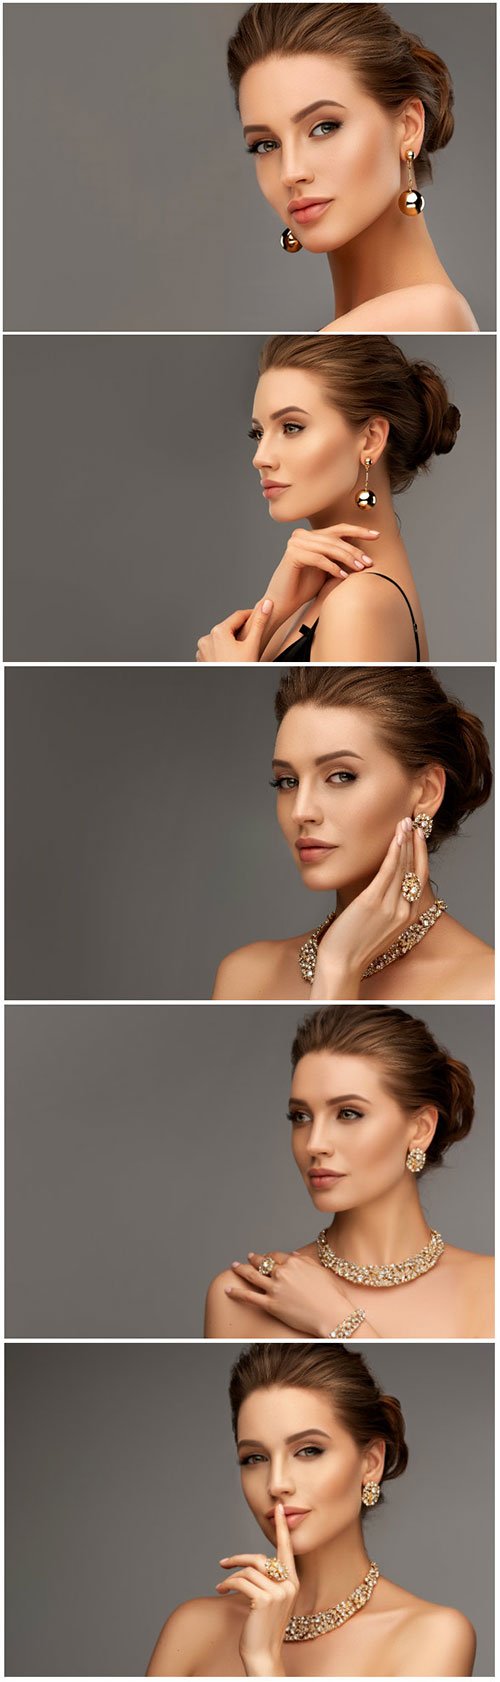 Fashionable and stylish woman in trendy jewelry big earrings